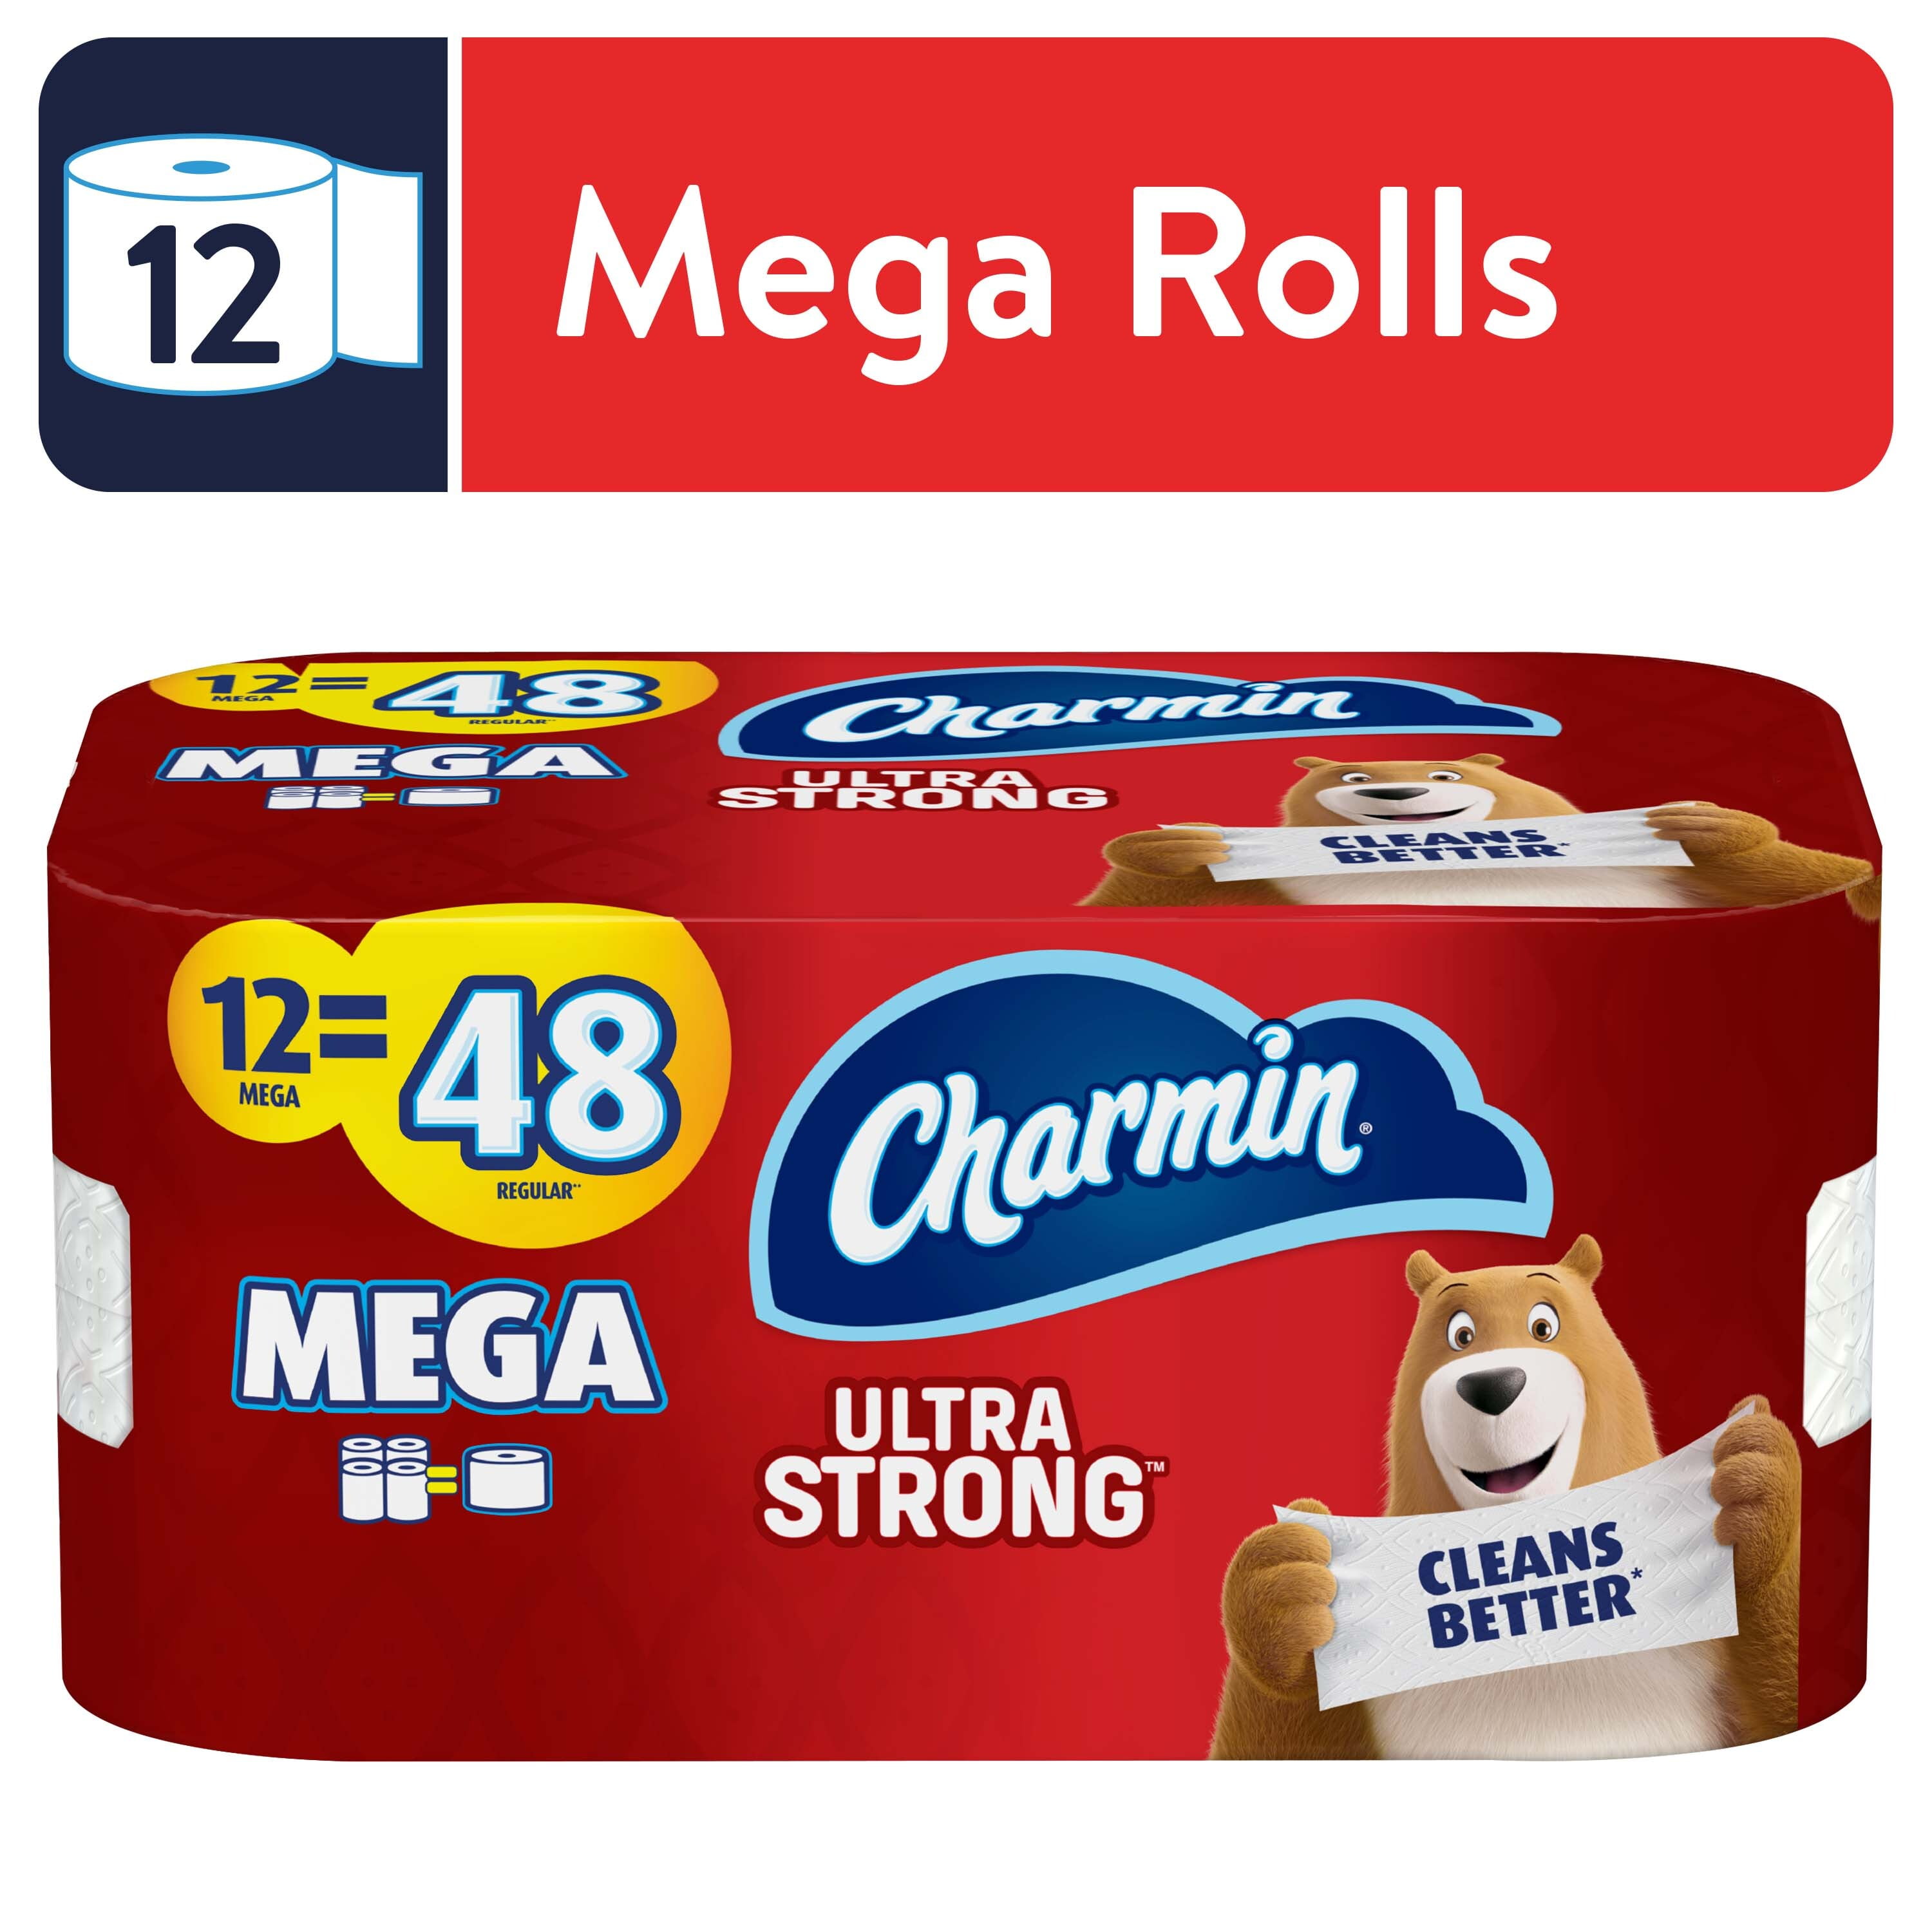 Details about   Charmin Ultra Strong Toilet Paper 6864 Sheets 24 Mega Rolls 